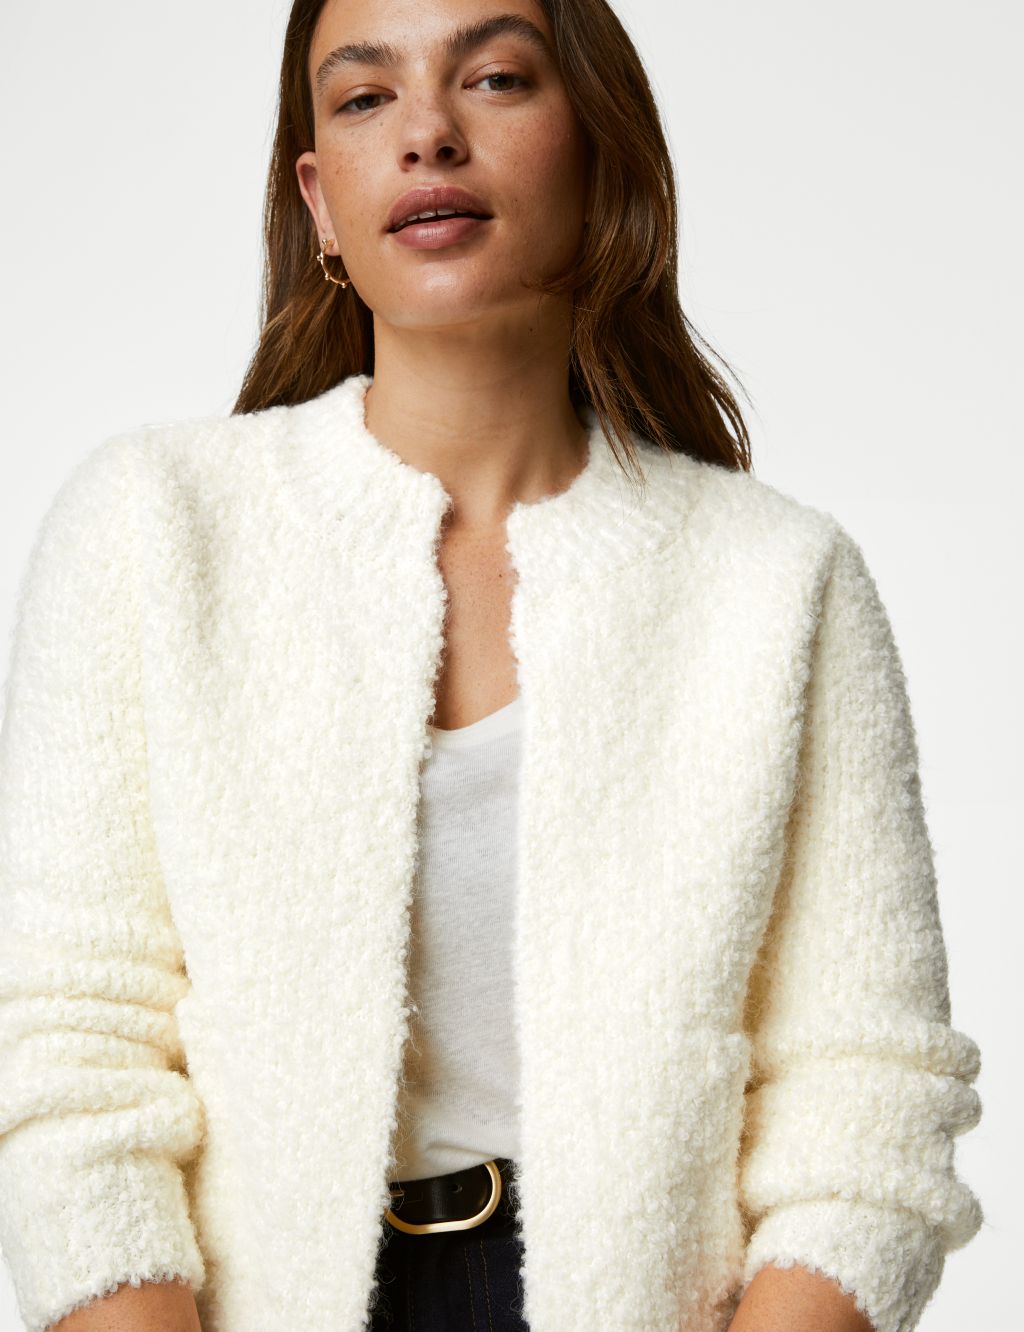 Textured Edge to Edge Knitted Jacket image 1